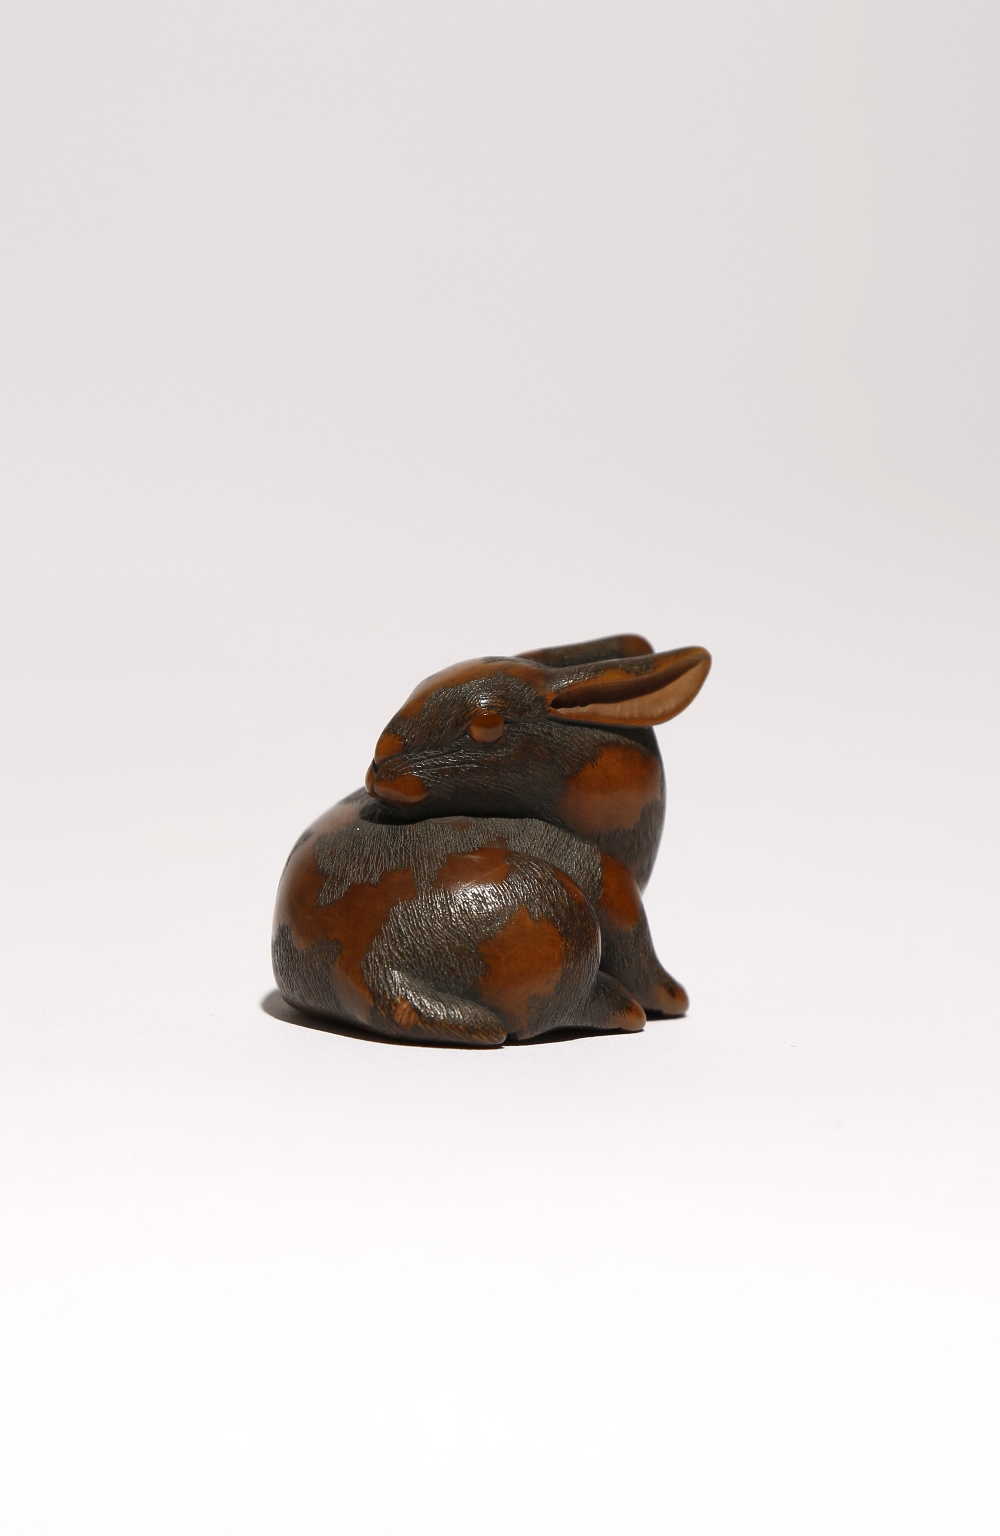 A JAPANESE WOOD NETSUKE OF A HARE WITH AMBER EYES EDO PERIOD, 19TH CENTURY Recumbant and with its - Image 3 of 3